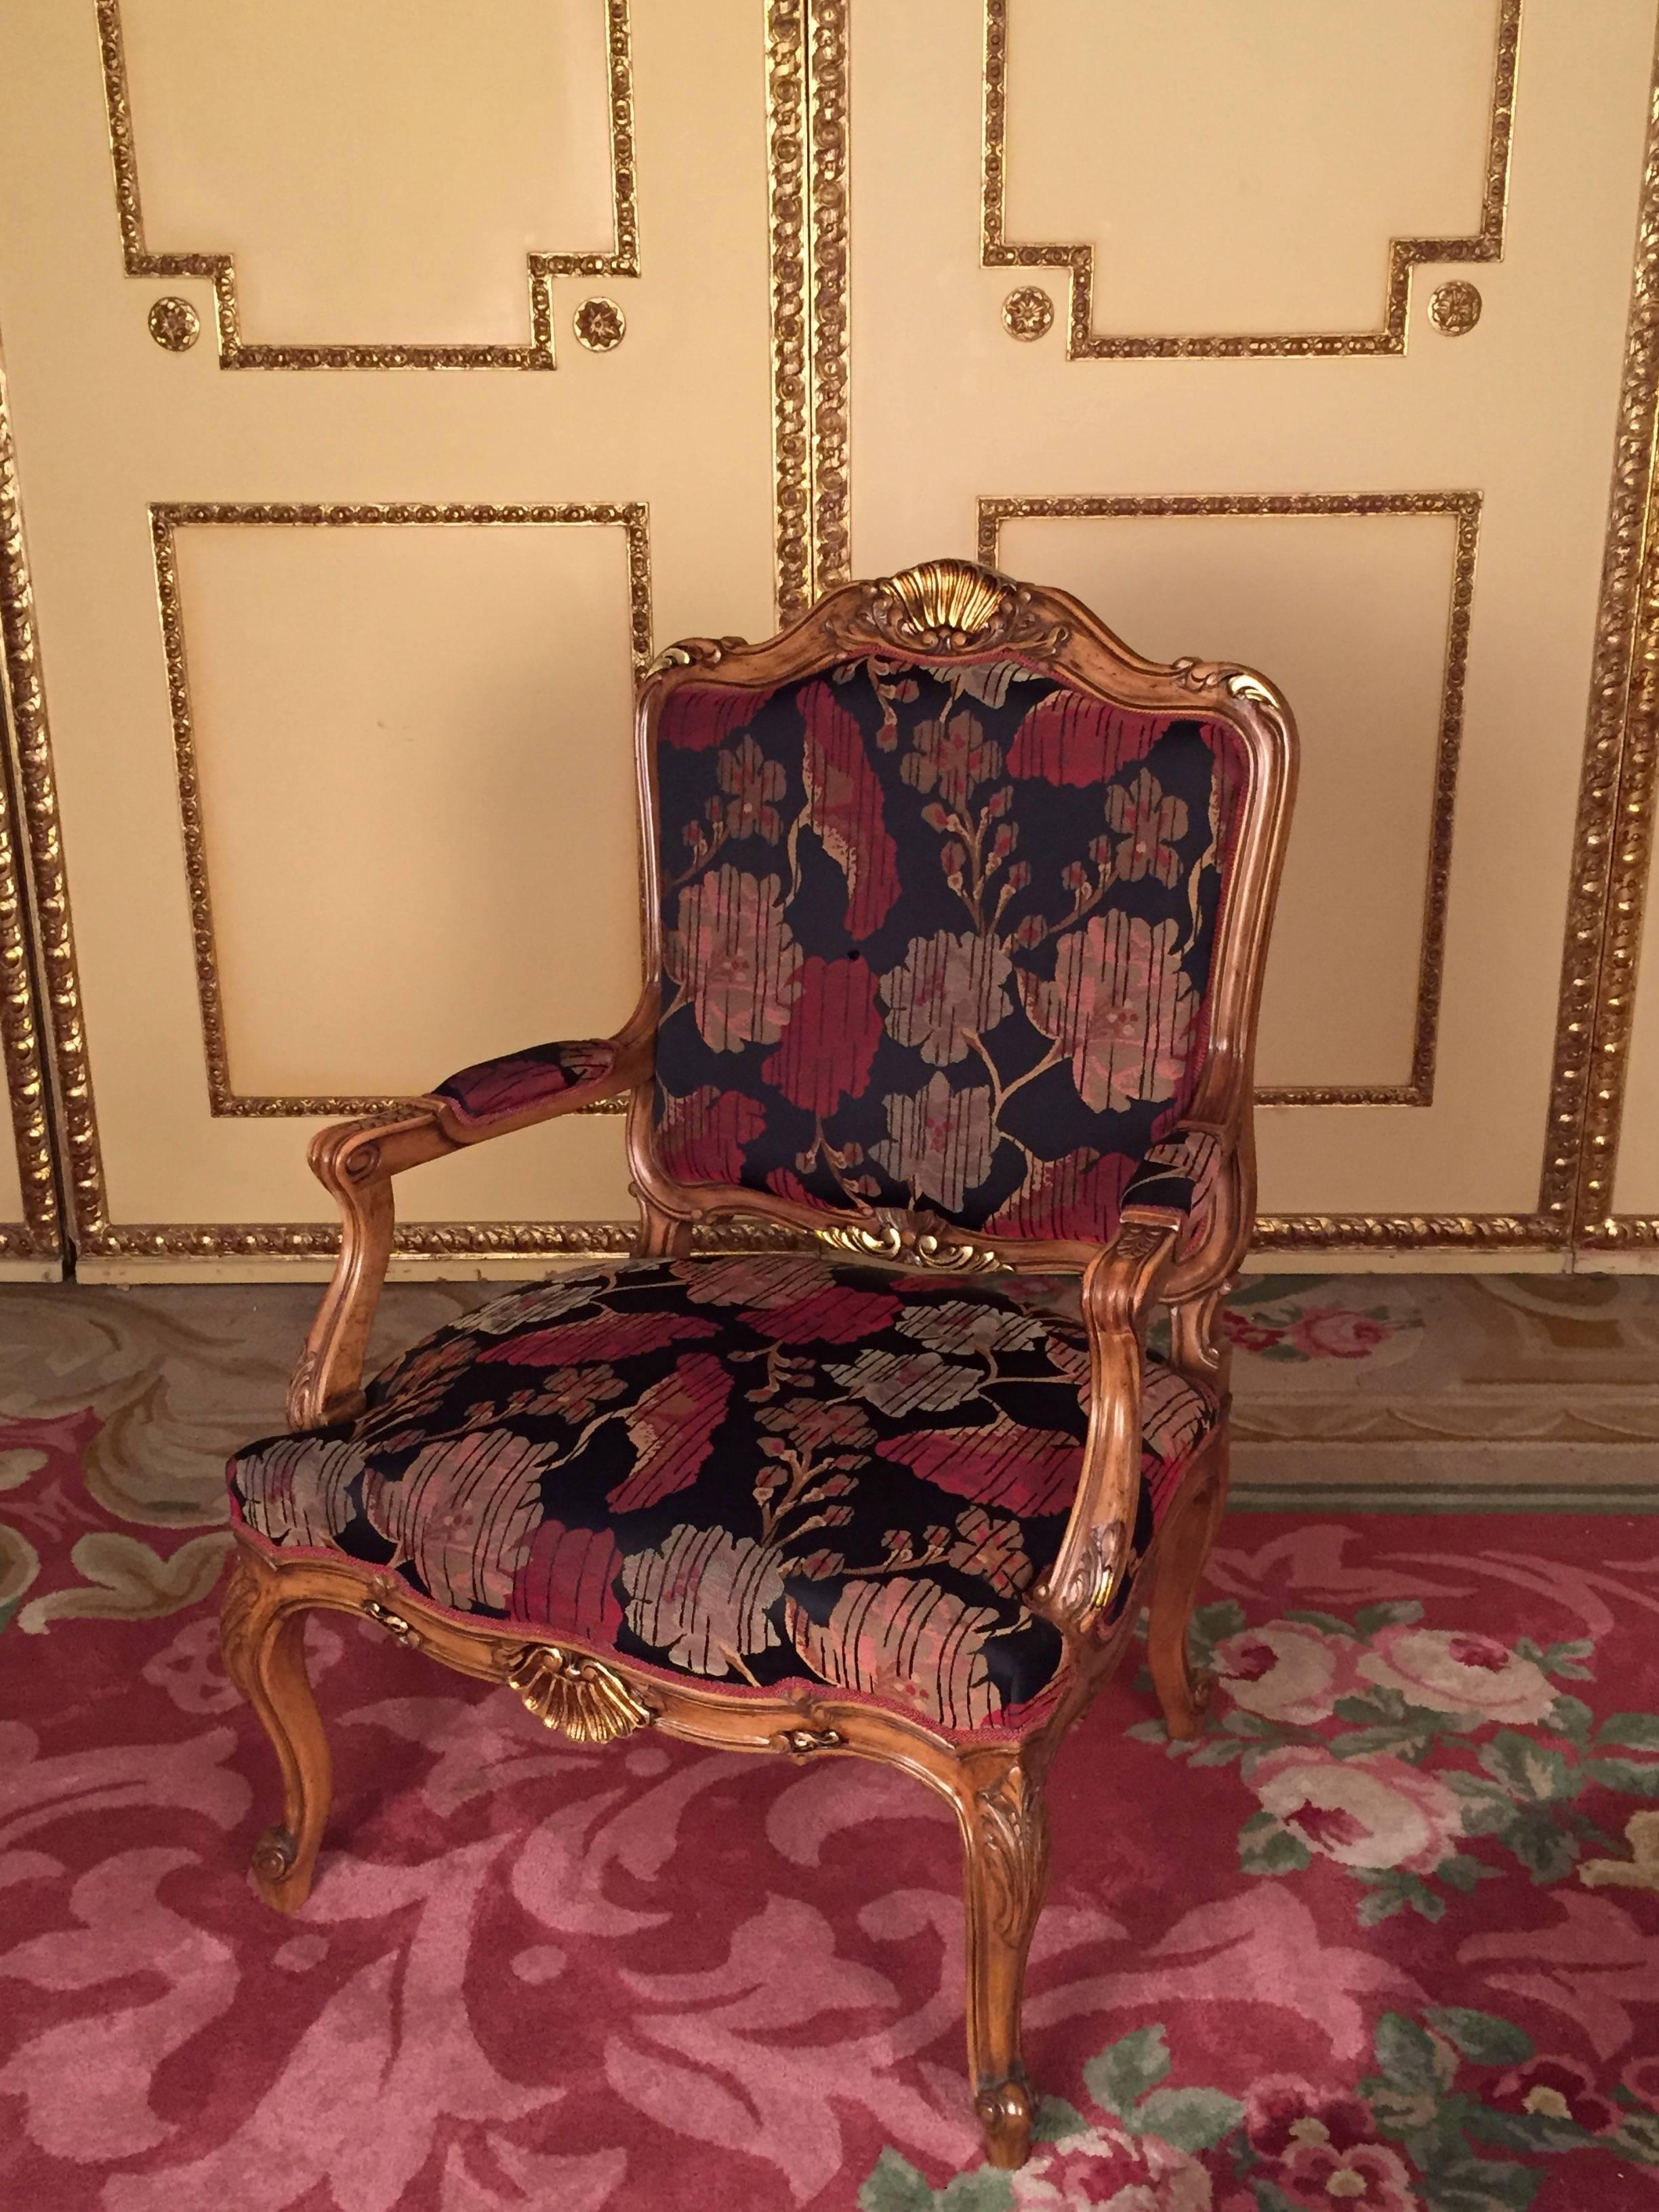 Extremely decorative and impressive armchair from the Neo-Baroque period.
Wooden body made of solid walnut. Upholstered seat and backrest. Cover made of high quality fabric.


(C-134).